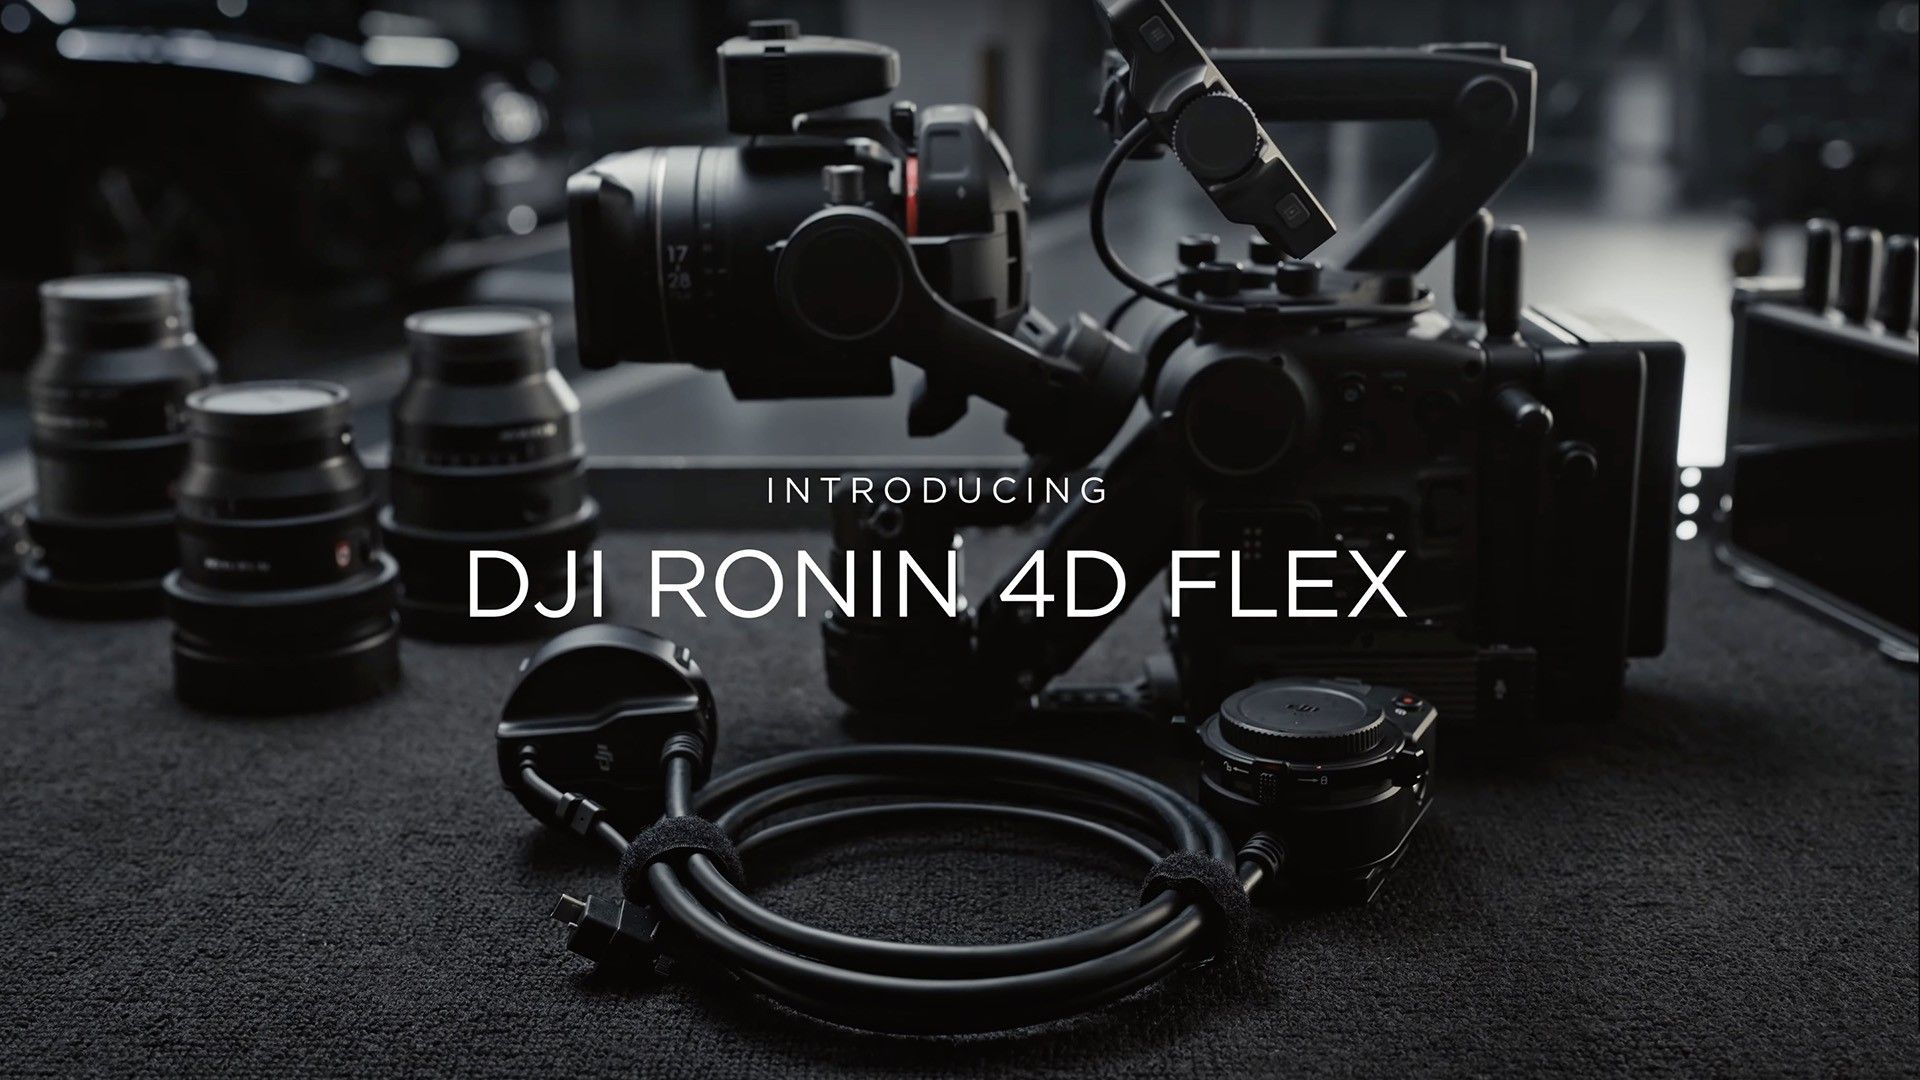 DJI Takes Notes From Sony To Make the Ronin 4D Flex w/ ProRes RAW